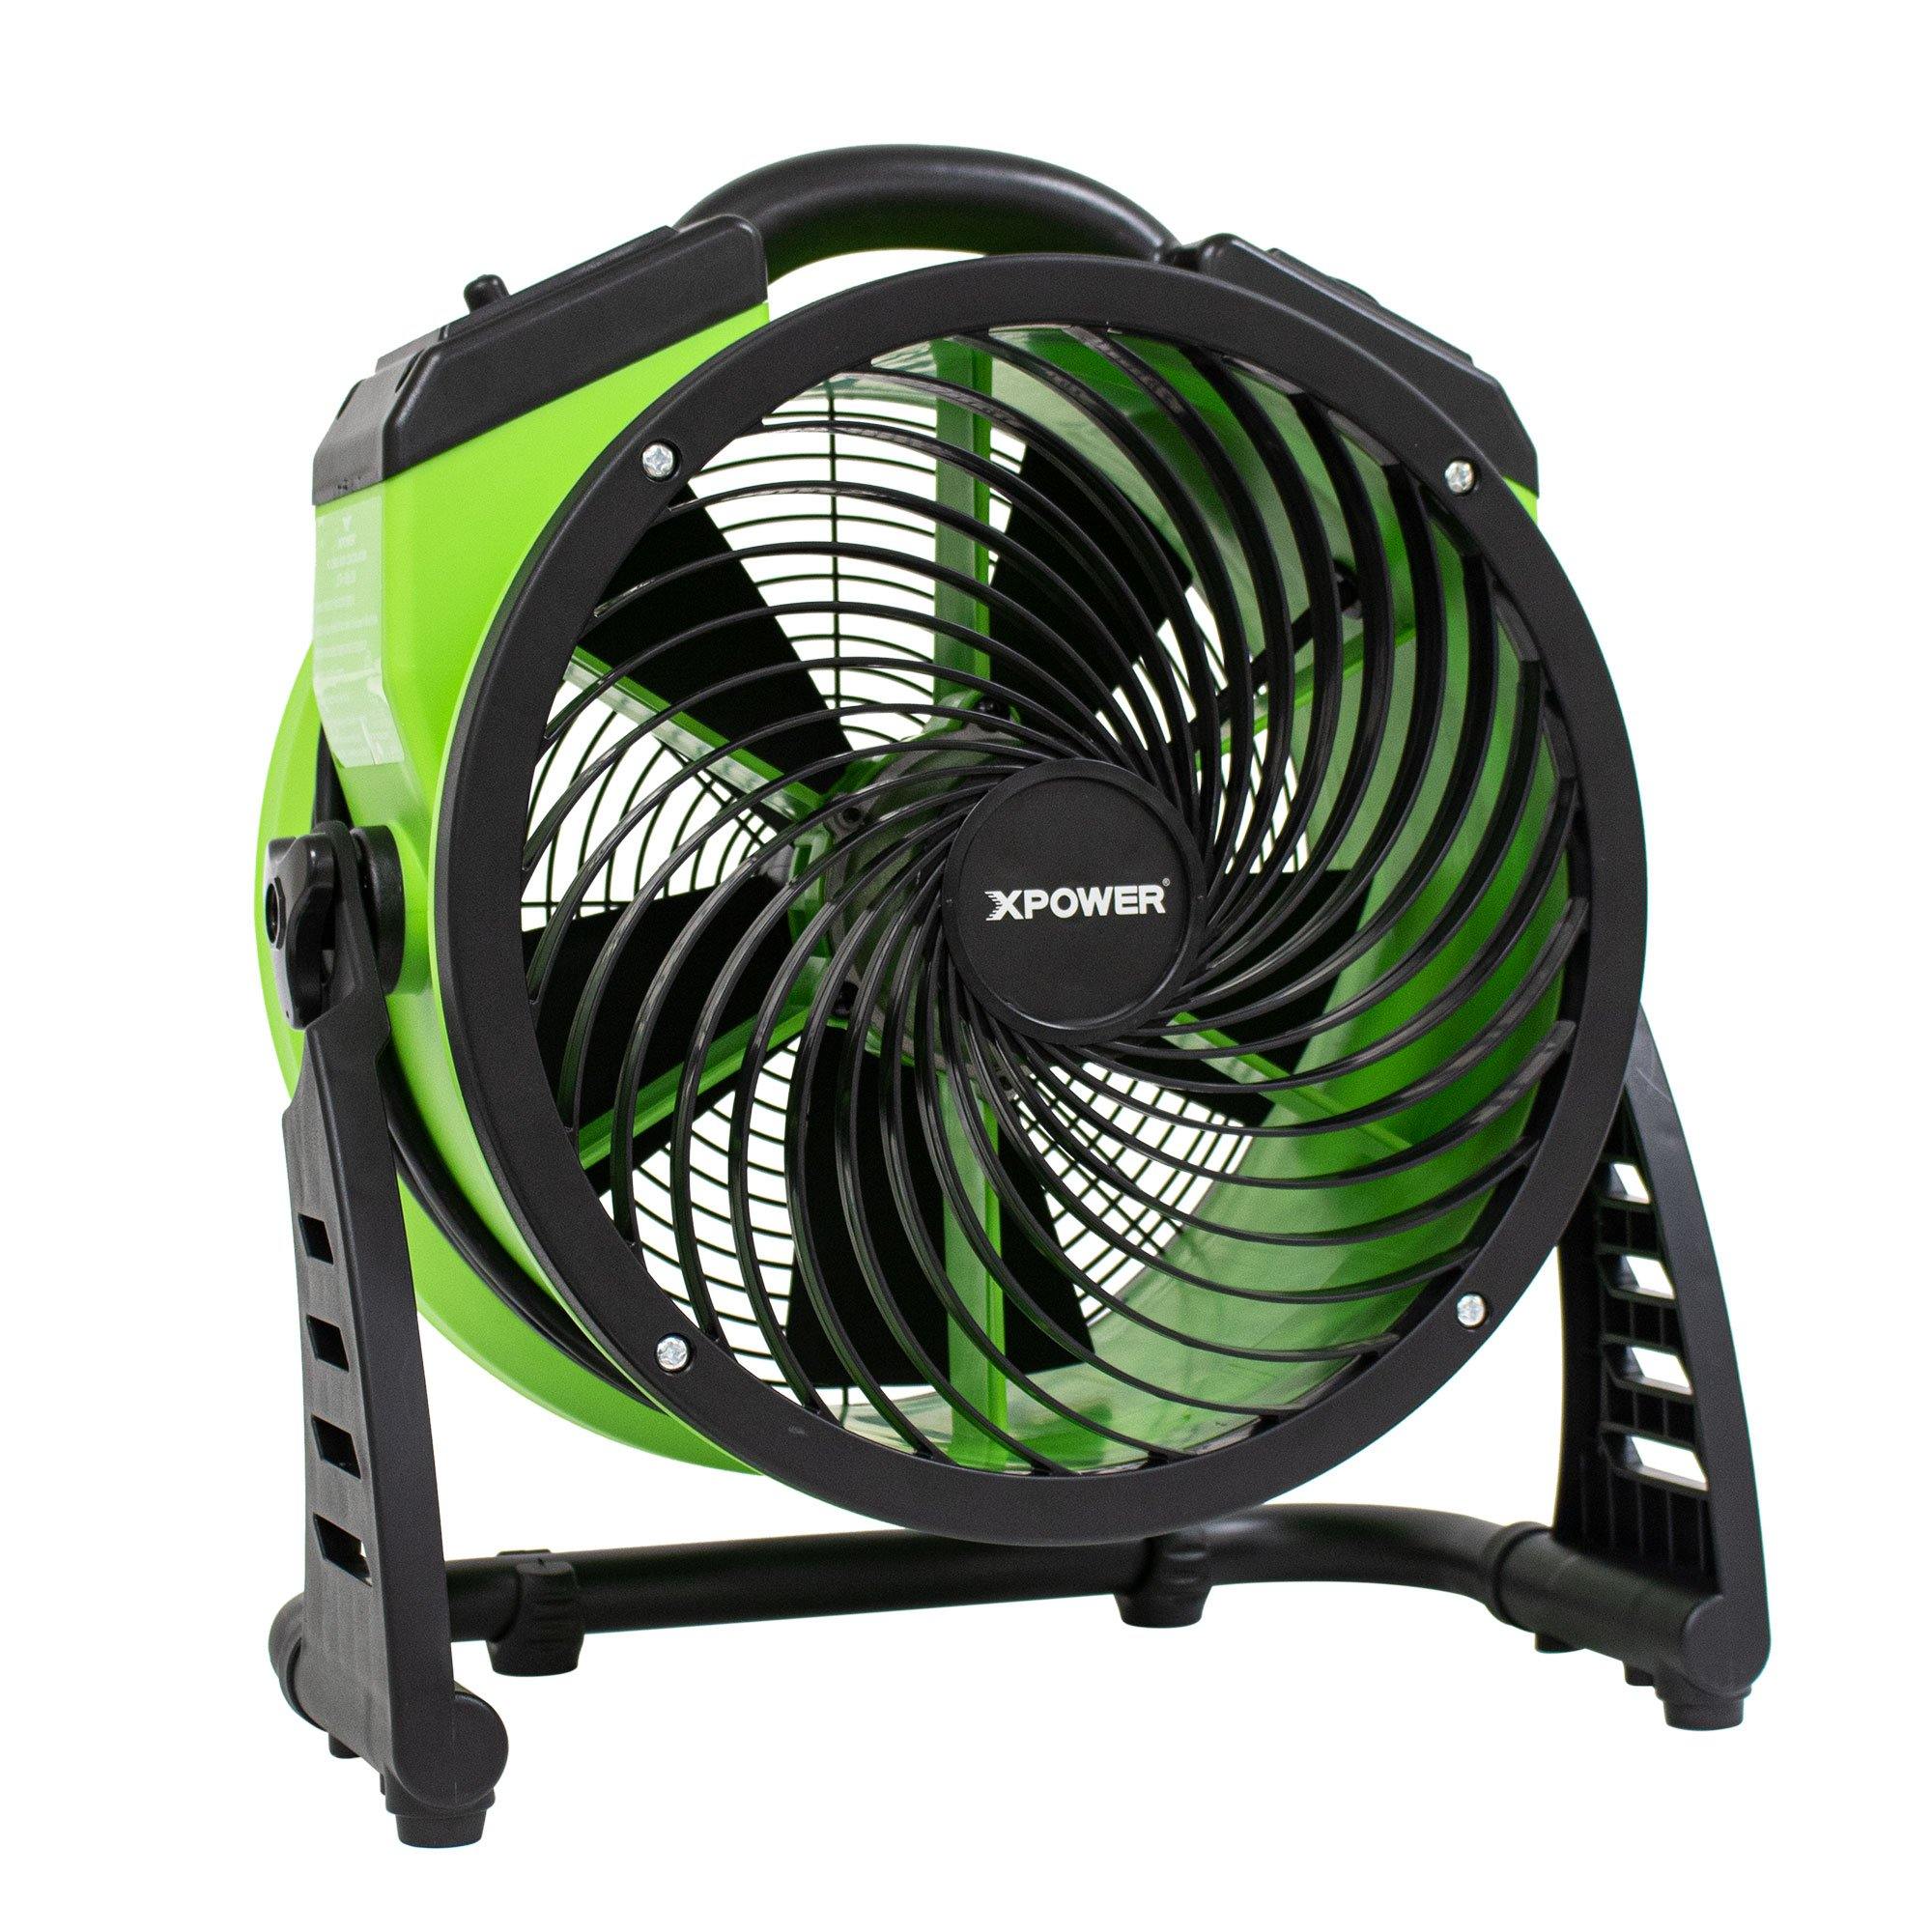 XPOWER FC-250D Pro 13” Brushless DC Motor Air Circulator Utility Fan with Timer